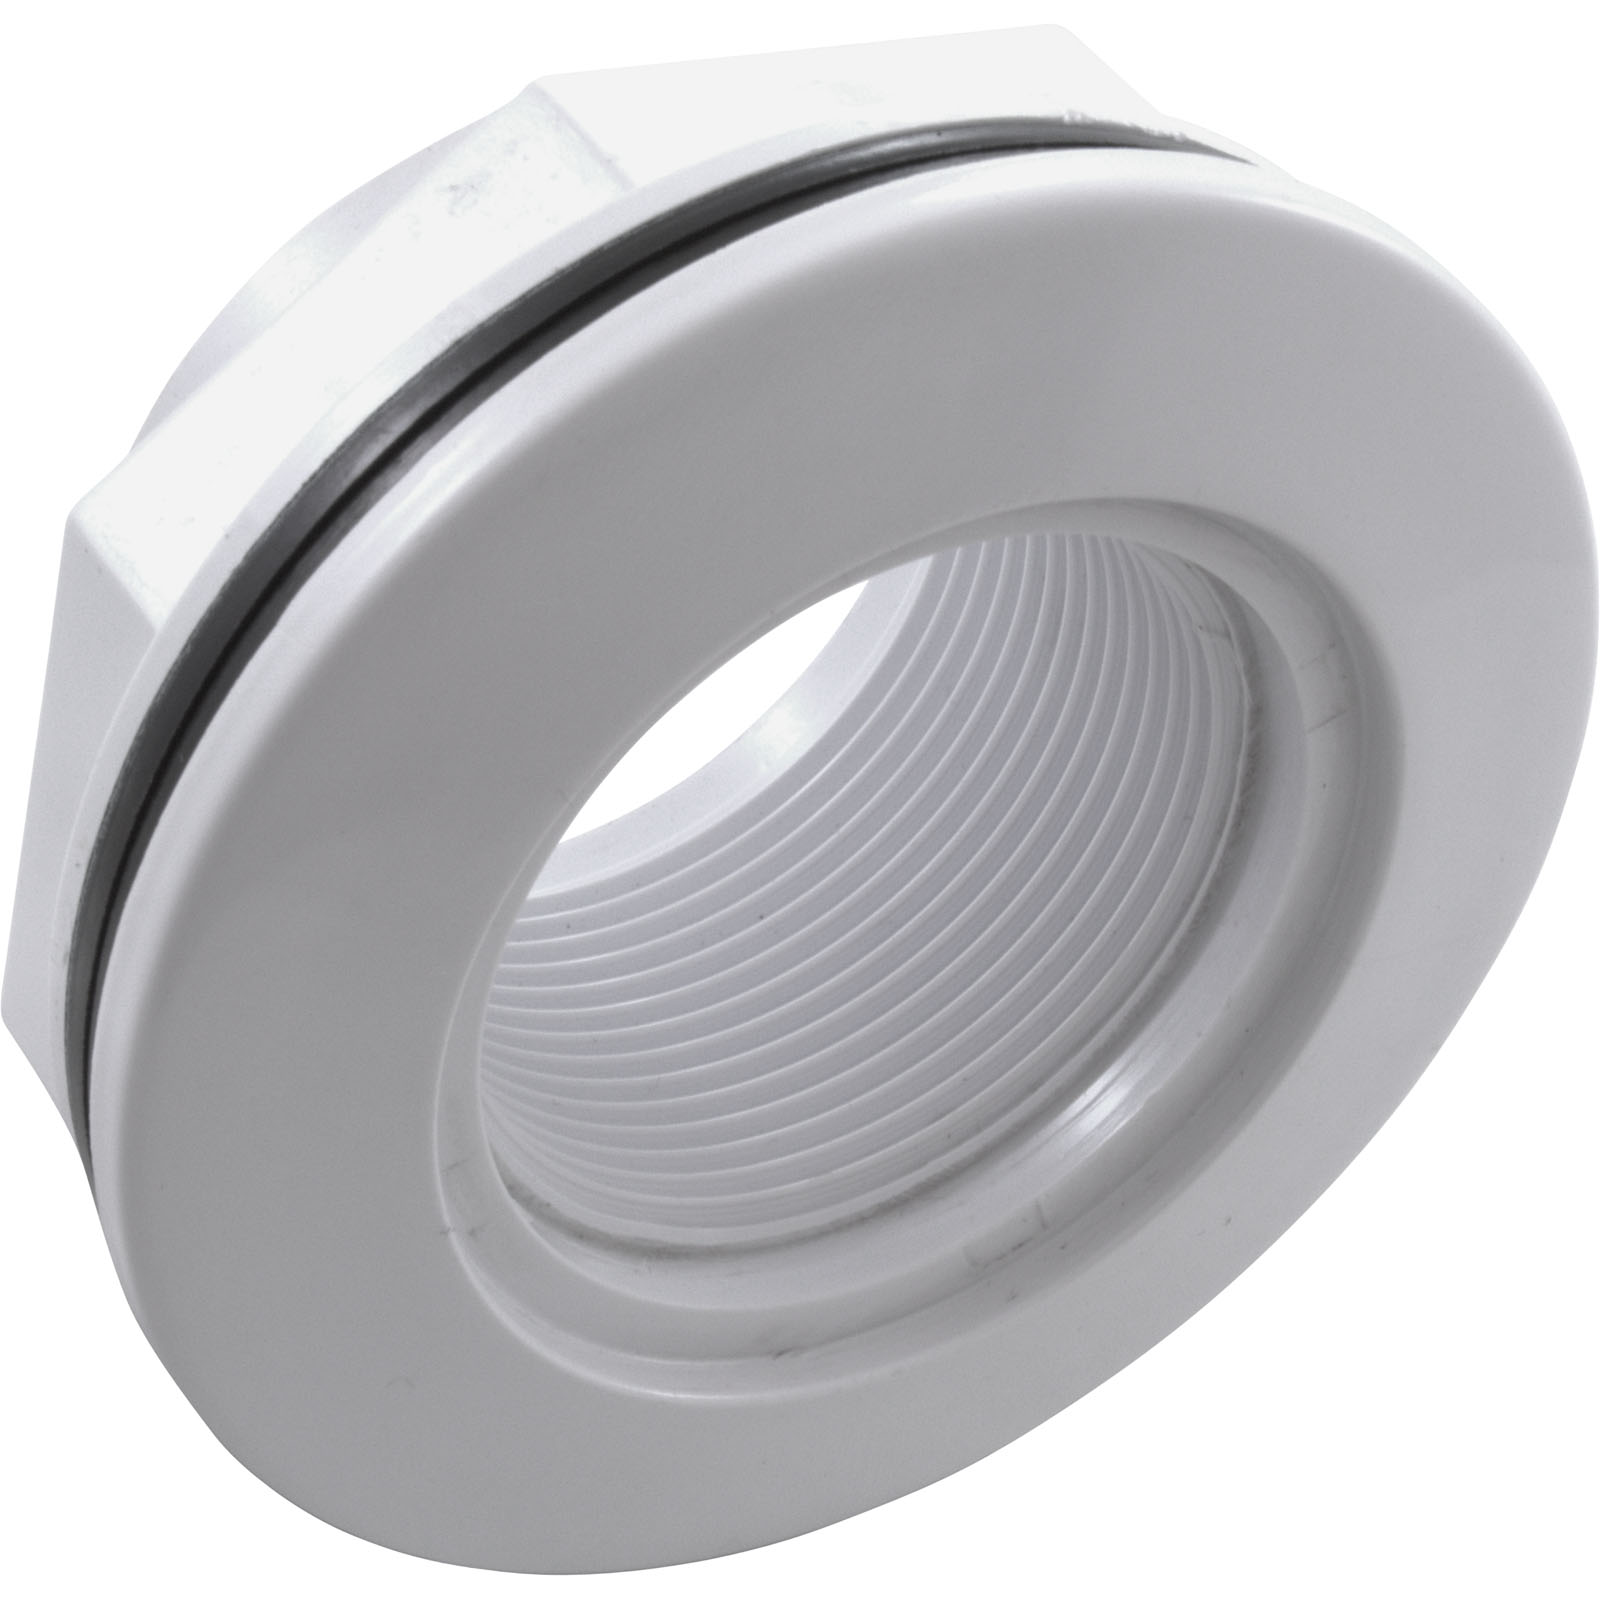 Picture of 25550-000-000 Wall Fitting CMP 2-3/8"hs 1-1/2"fpt 3-1/2"fd w/Nut Wht